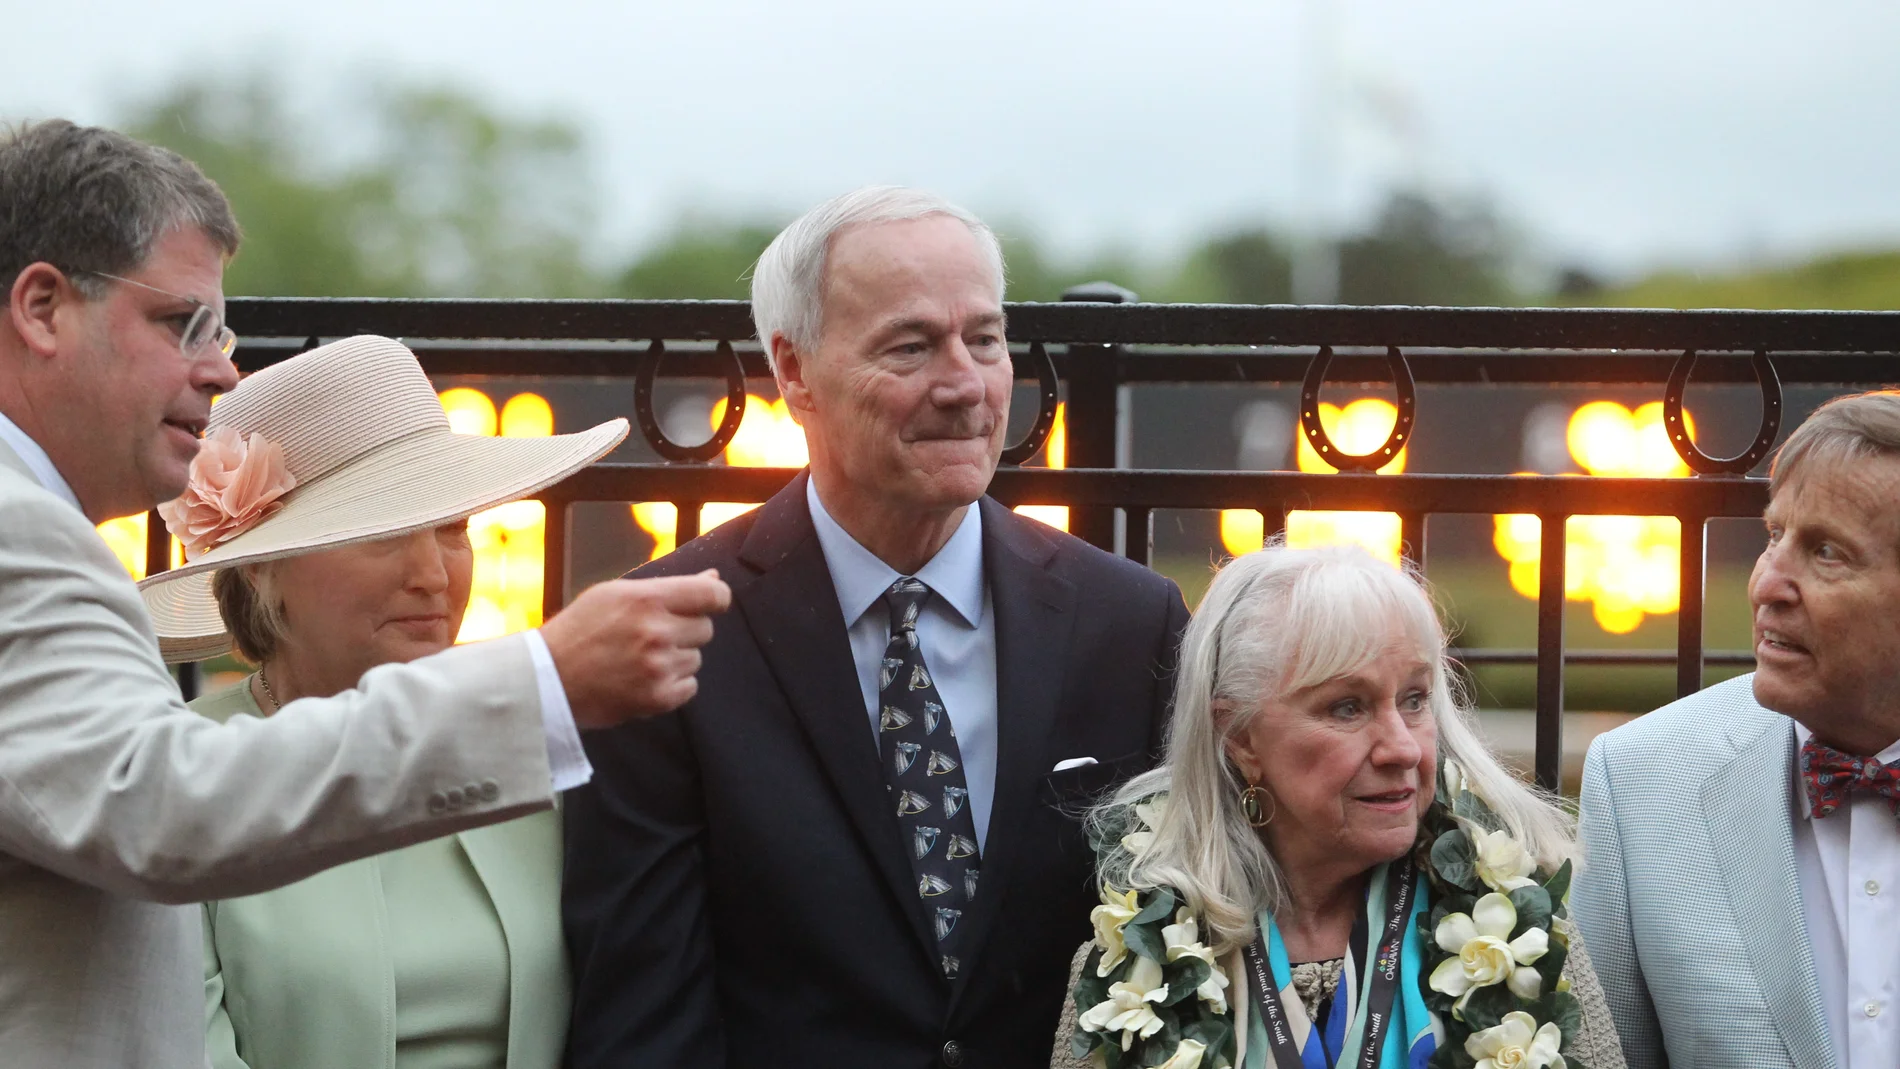 April 13, 2019 - Hot Springs, Arkansas, U.S. - April 13, 2019: Omaha Beach owner Richard Porter with Arkansas Governor Asa Hutchinson in the winners circle after winning the Arkansas Derby at Oaklawn Racing Casino Resort in Hot Springs, Arkansas. Â©Justin Manning/Eclipse Sportswire/CSM (Foto de ARCHIVO) 13/04/2019